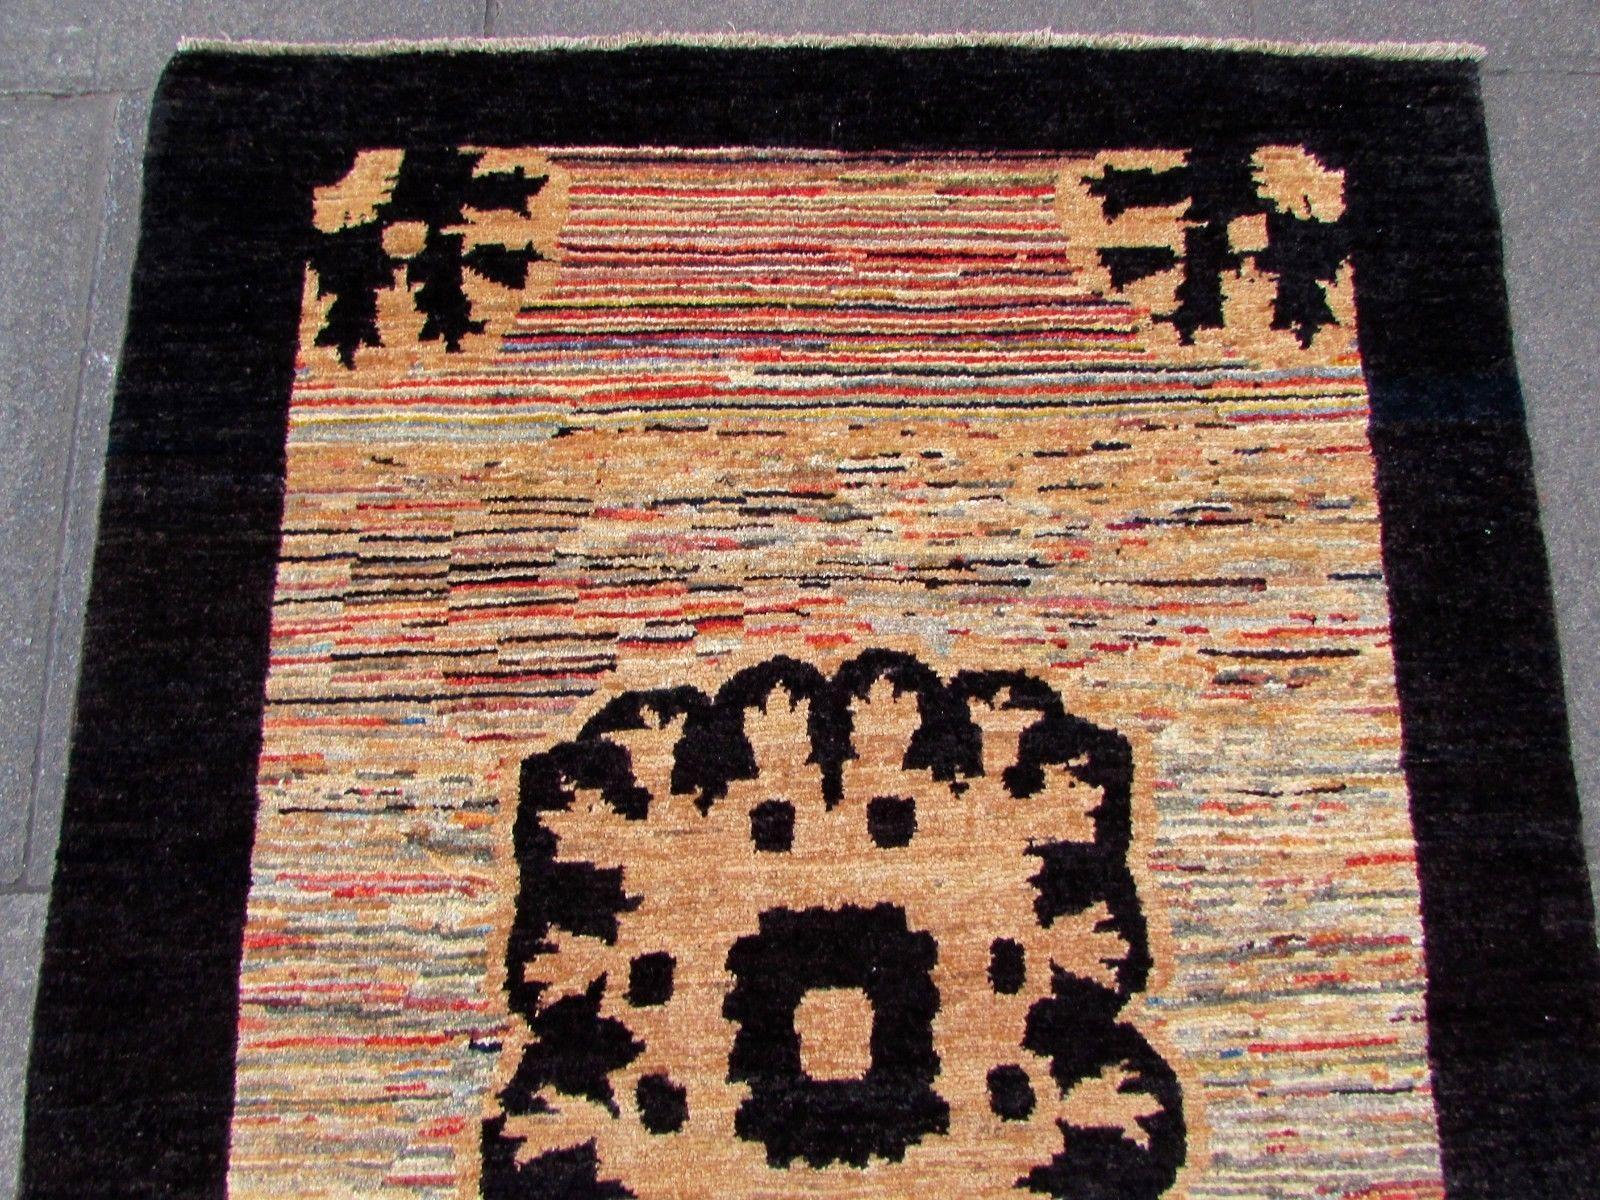 Handmade vintage Gabbeh rug in colorful wool. The rug is from the end of 20th century in original good condition.

- Condition: original good,

- circa 1980s,

- Size: 3.4' x 5' (103cm x 154cm),

- Material: wool,

- Country of origin: